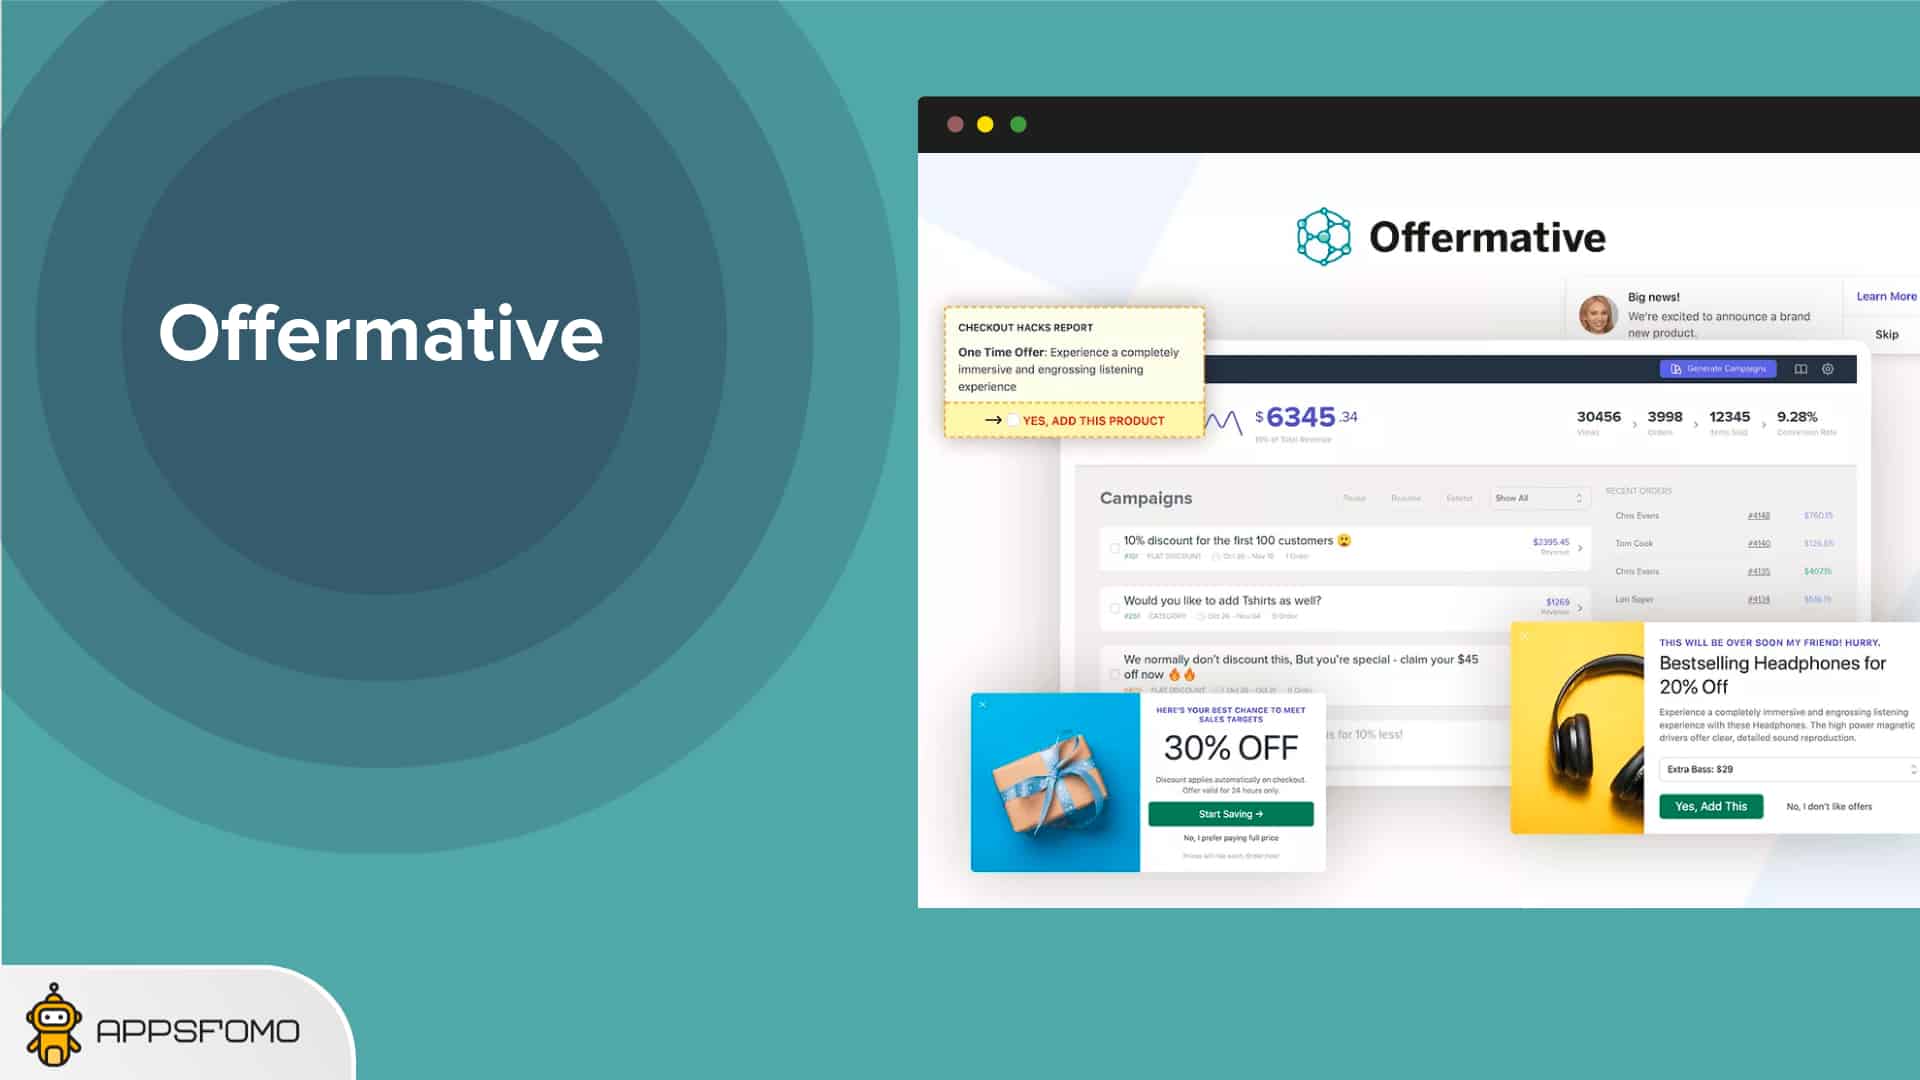 Offermative